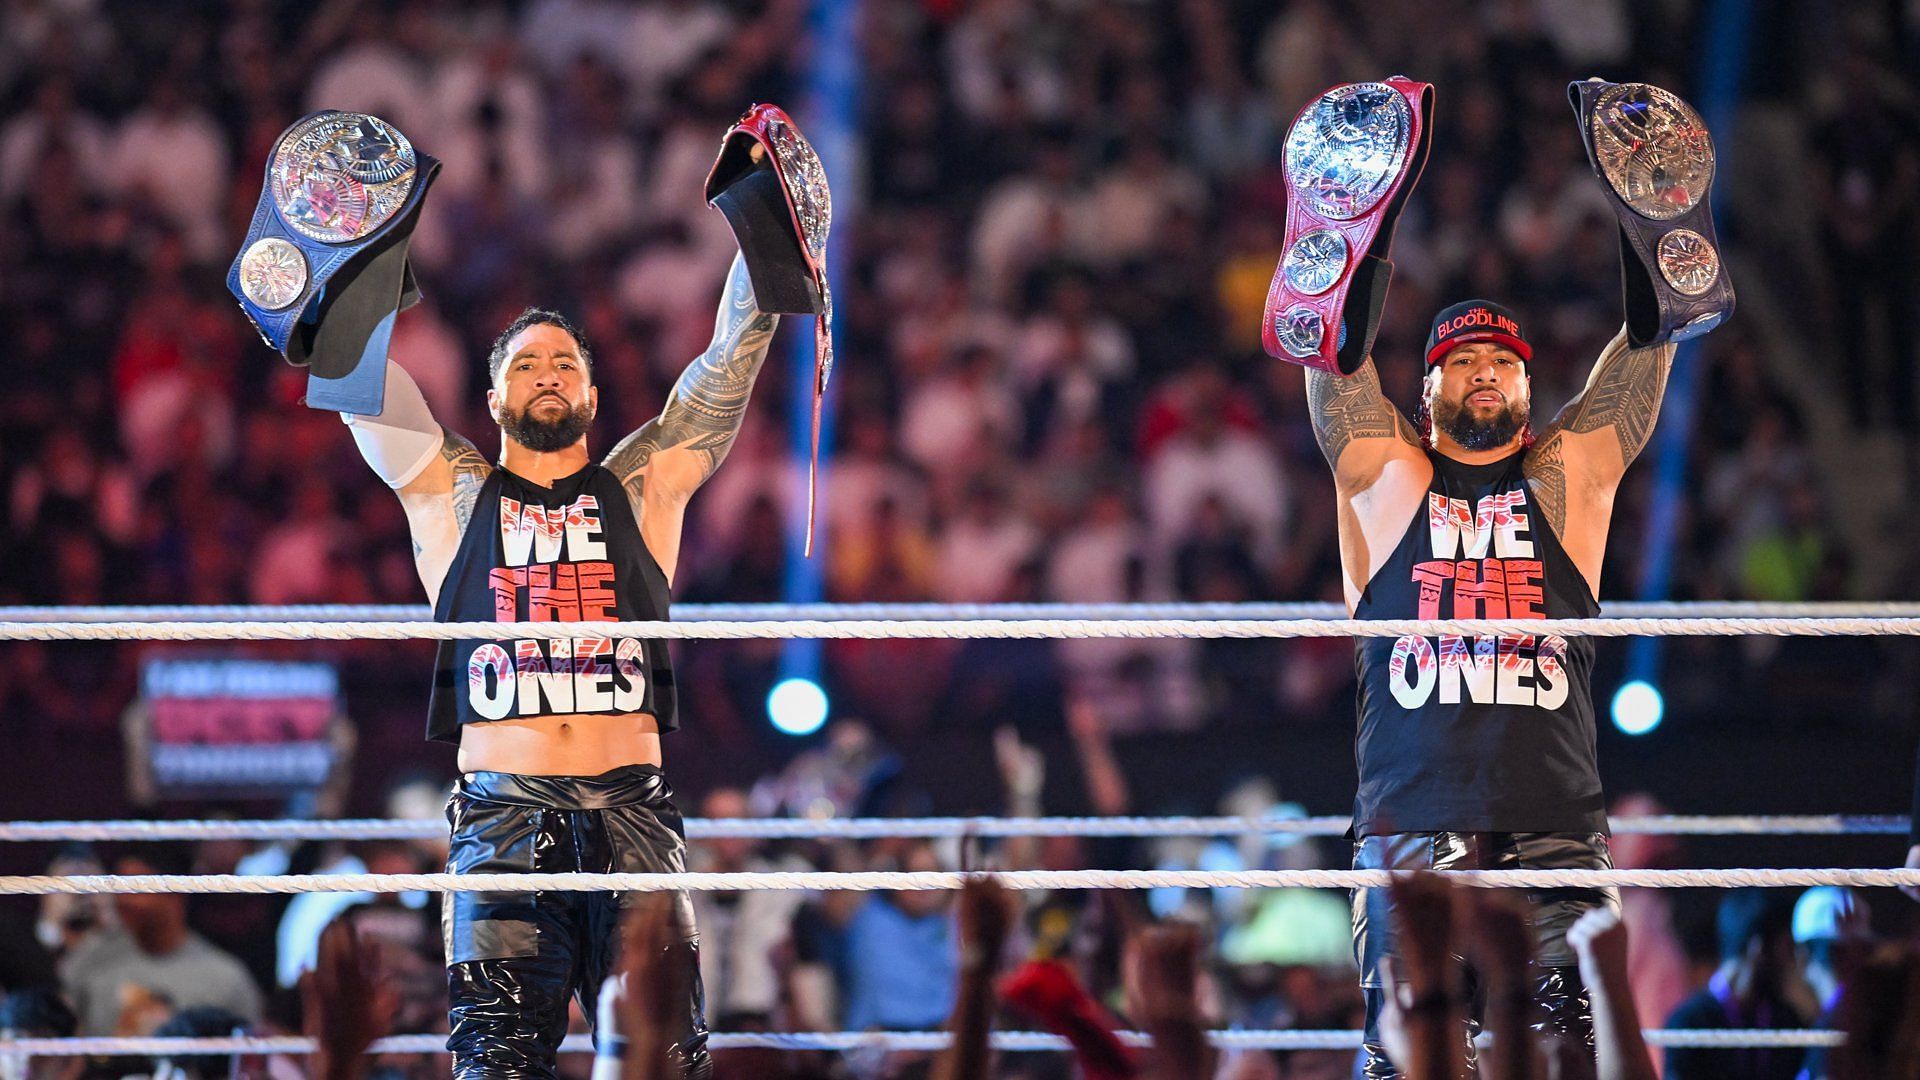 The Usos are a dominant tag team